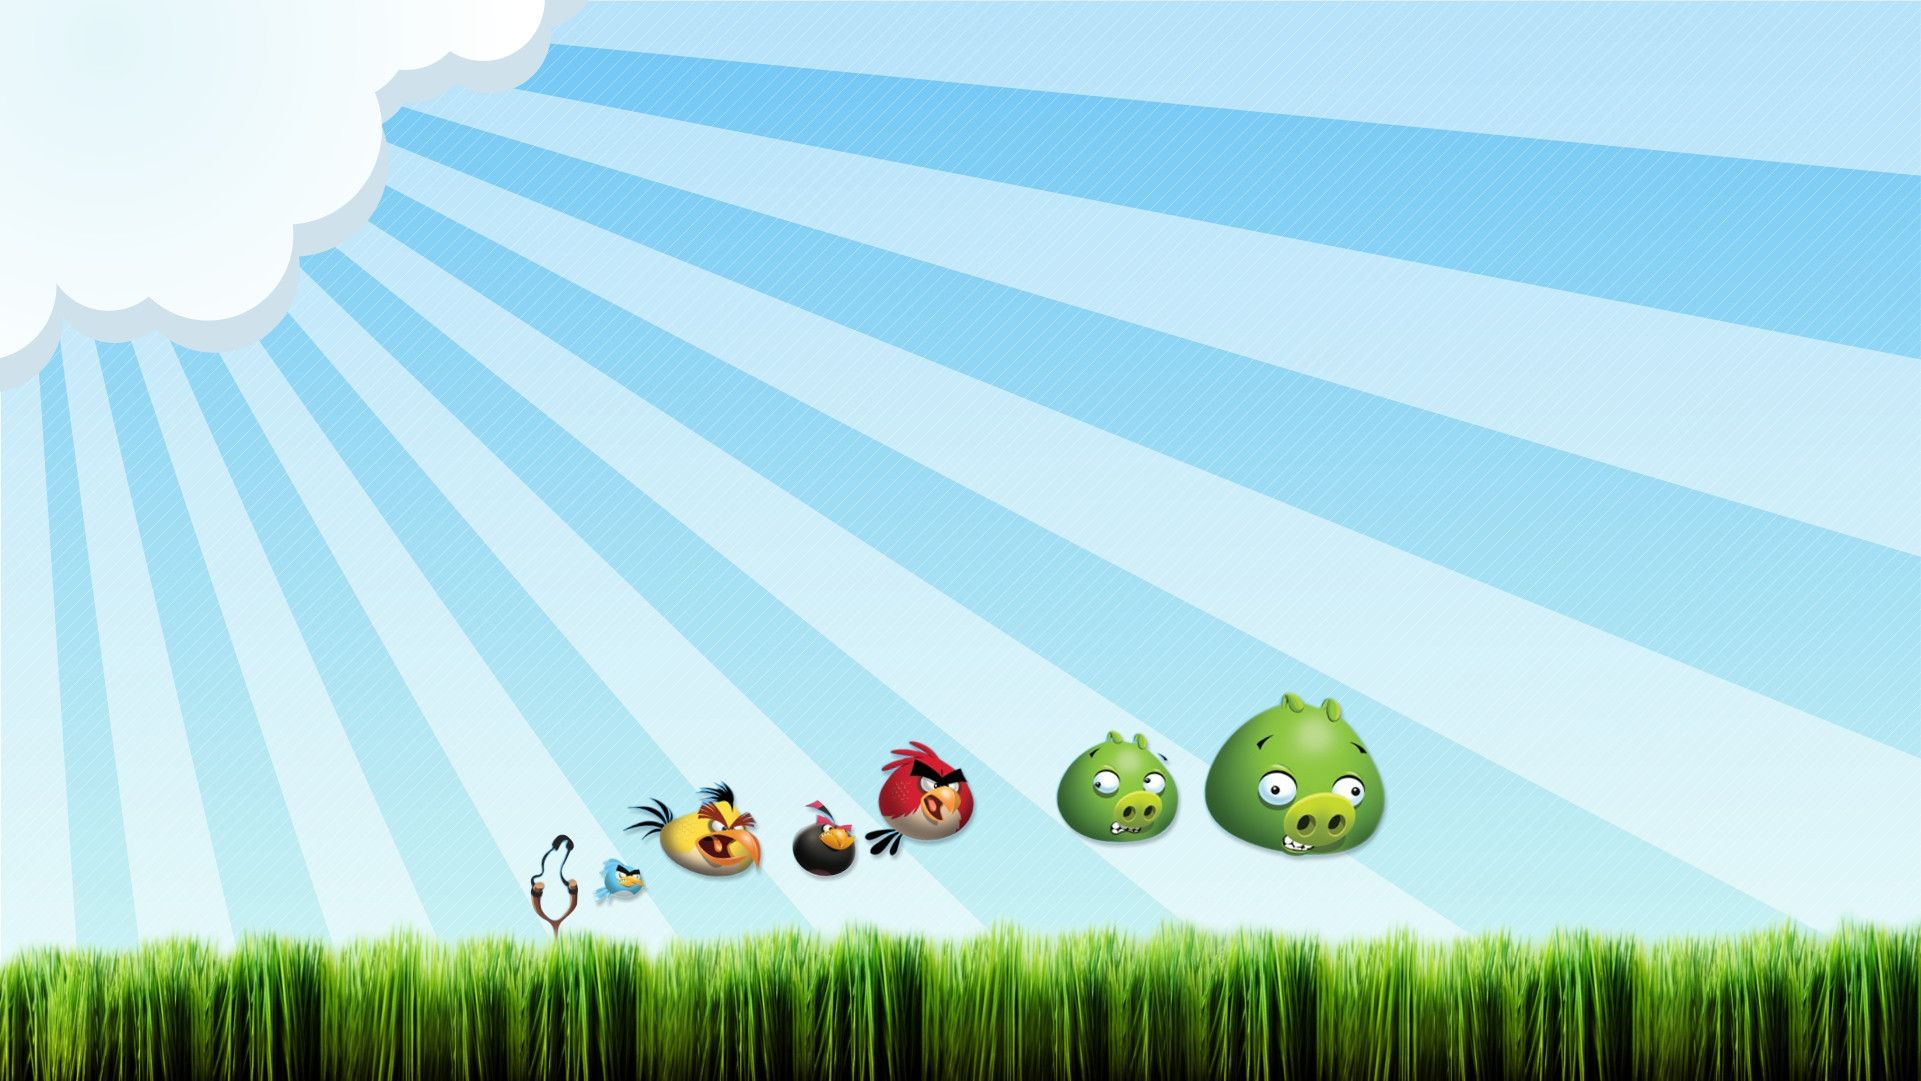 Angry Birds Wallpaper (3) - PCTechNotes :: PC Tips, Tricks and Tweaks